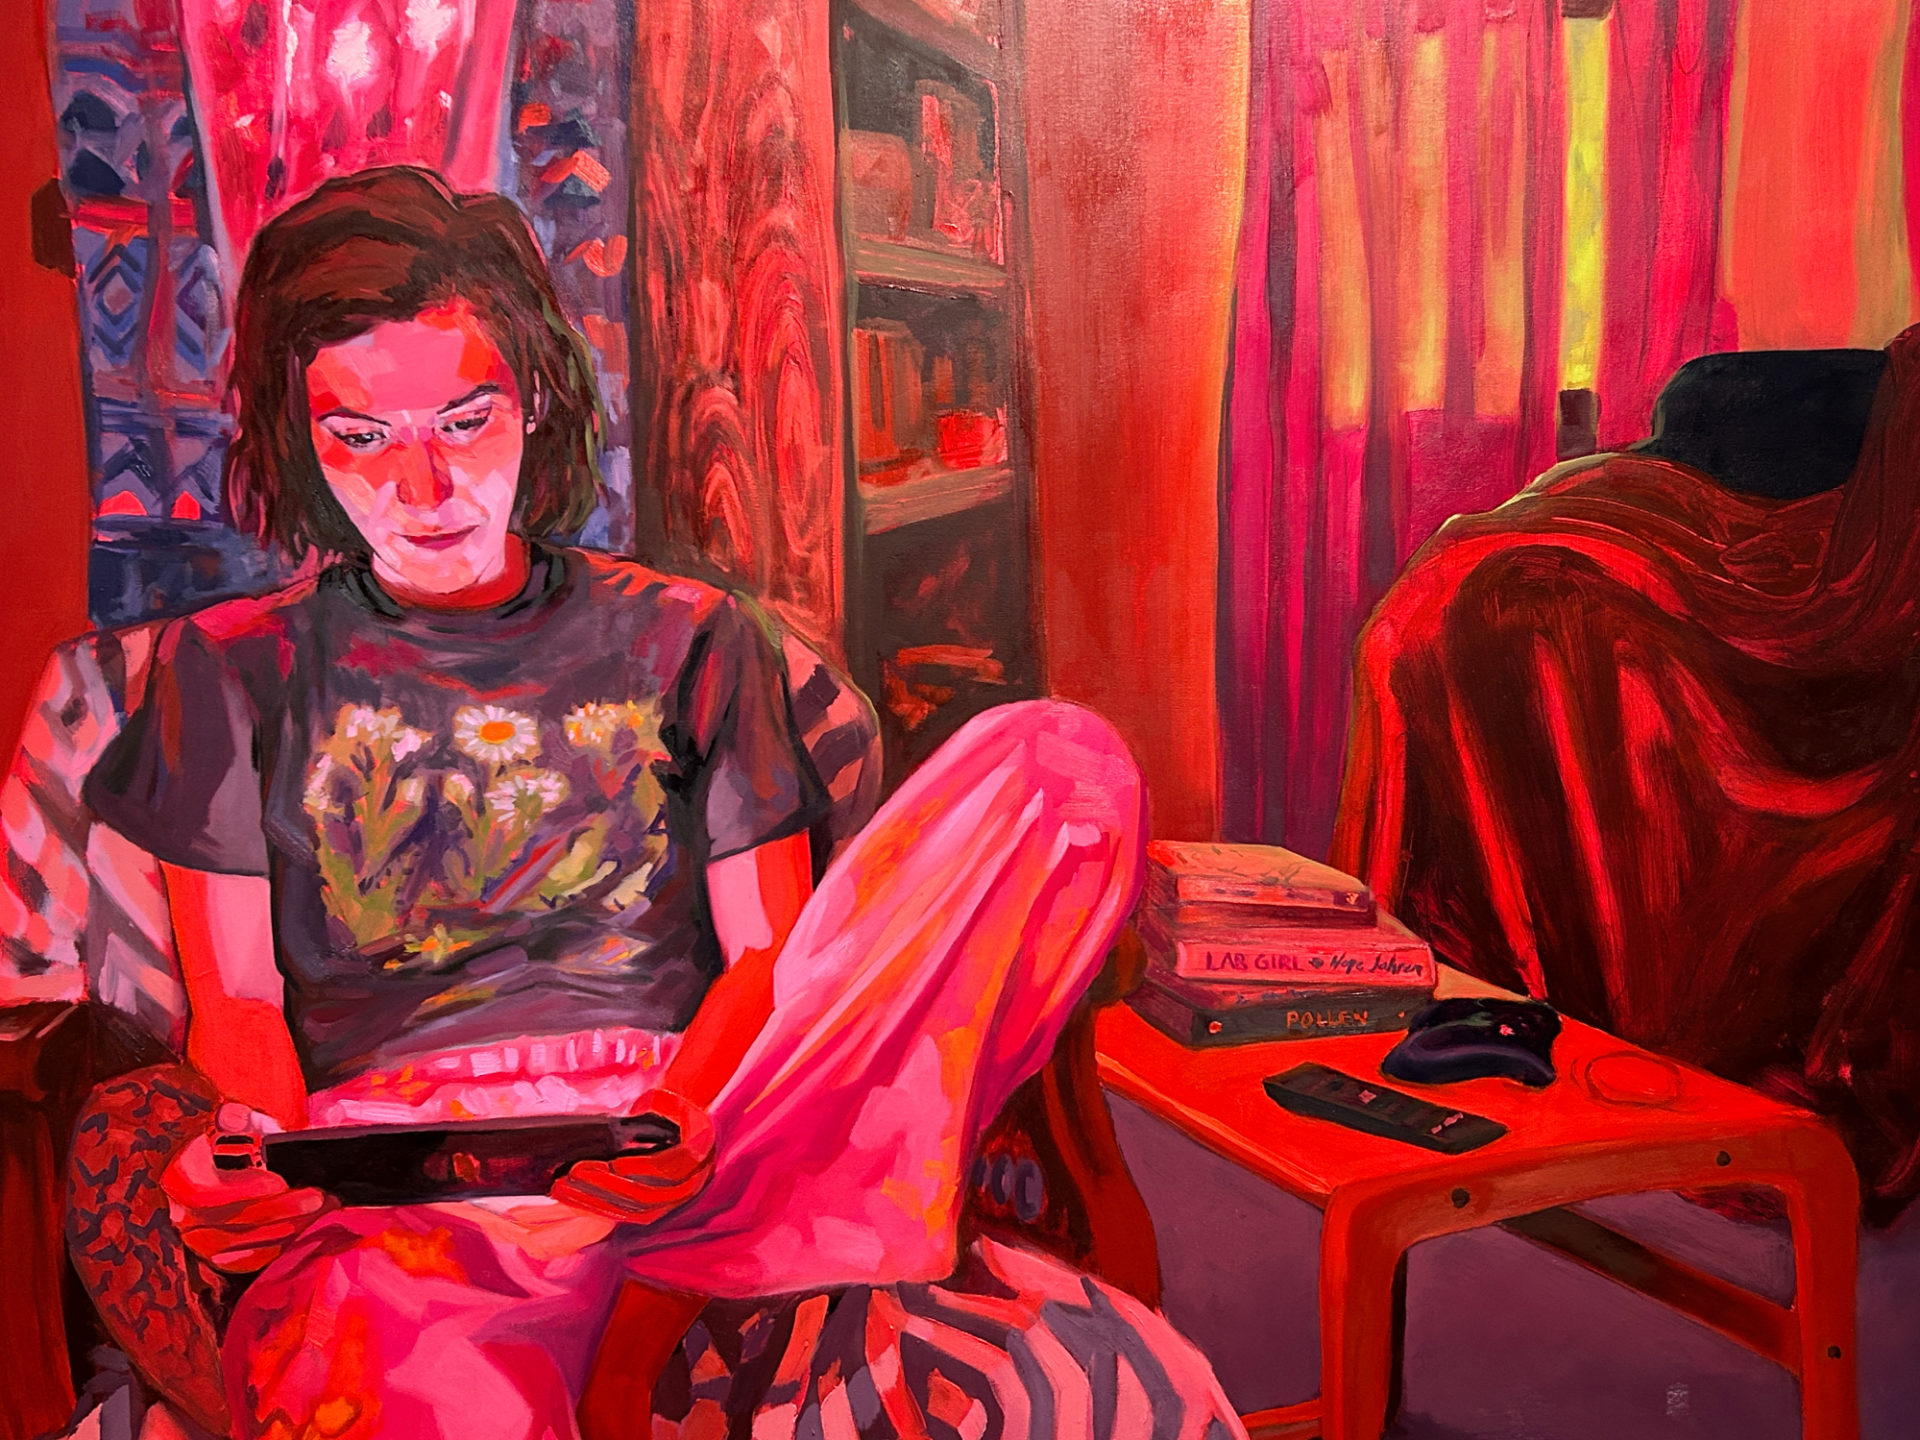 Painting of a person with brown hair playing a hand-held game. The painting is bright pink and blue. The woman sits on a chair by a table holding books and a television remote.